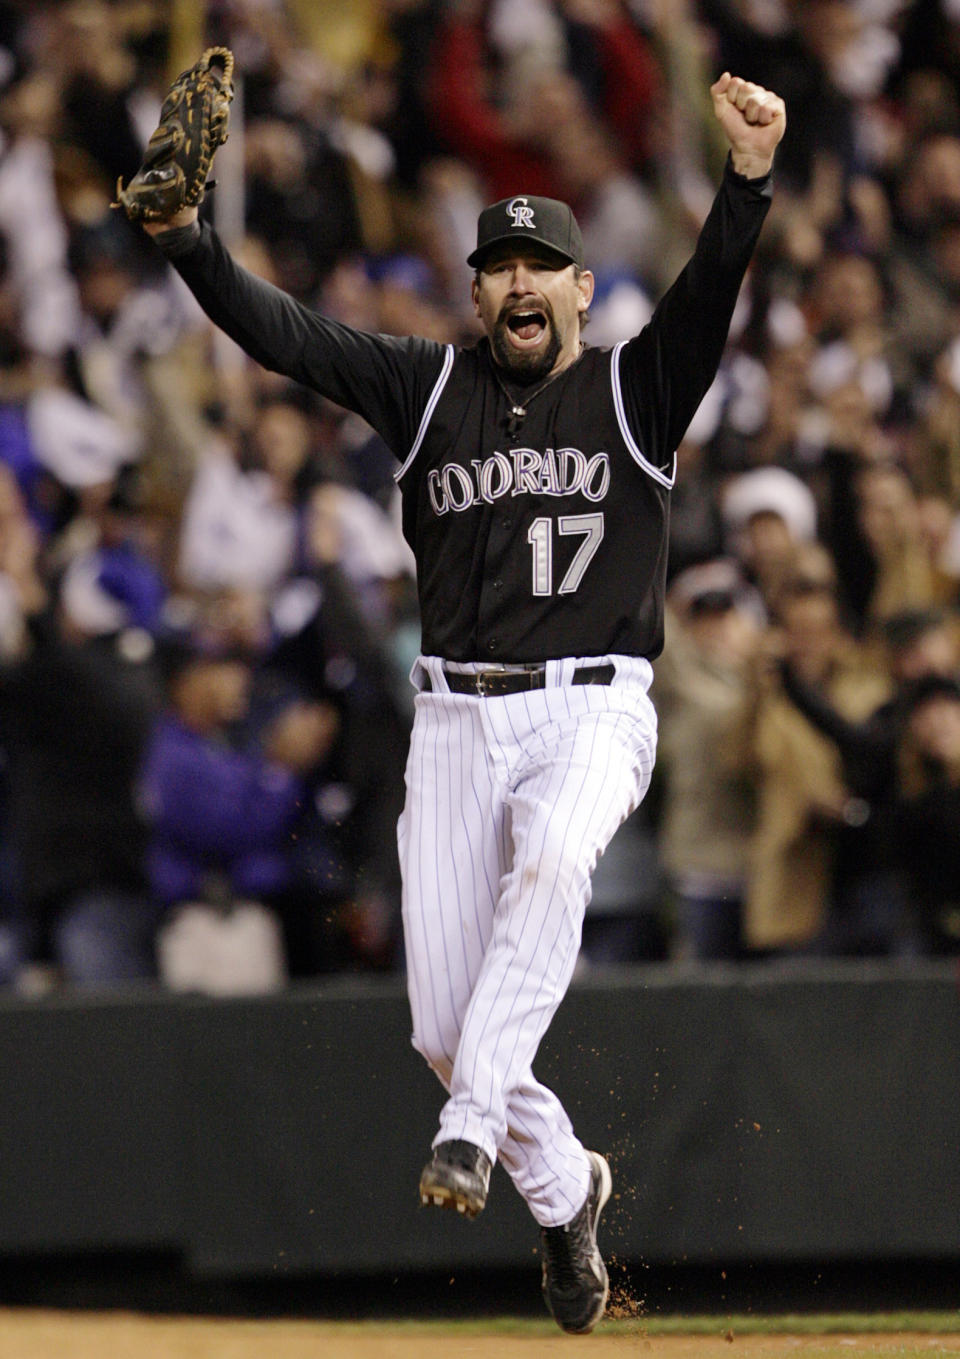 FILE - Colorado Rockies first baseman Todd Helton (17) celebrates after he made the last out to win Game 4 of the National League Championship baseball series against the Arizona Diamondbacks, 6-4, and advance to the World Series, Monday, Oct. 15, 2007, in Denver. Helton, Billy Wagner and Scott Rolen are leading contenders to be elected to baseball's Hall of Fame in the Baseball Writers' Association of America vote announced Tuesday, Jan. 24, 2023.(AP Photo/David Zalubowski, File)